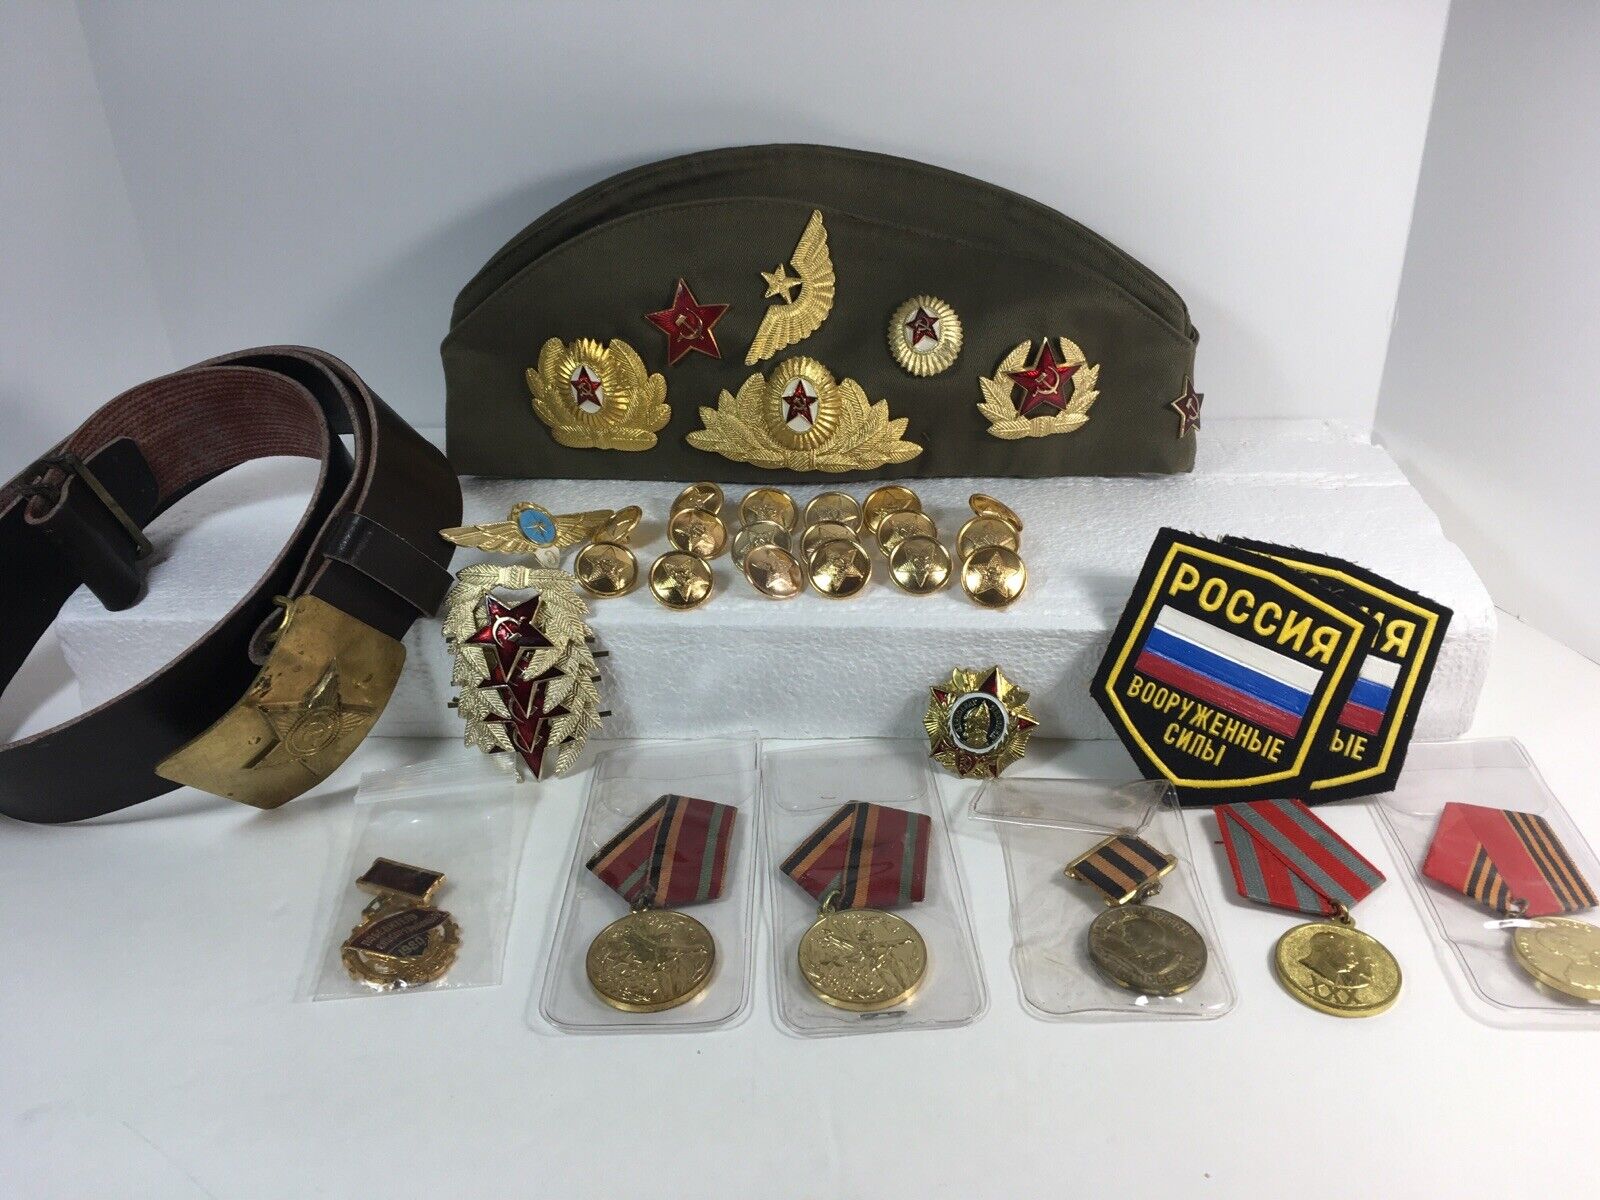 Lot Of Russian Military Memorabilia hat, medals, patches, military buttons etc